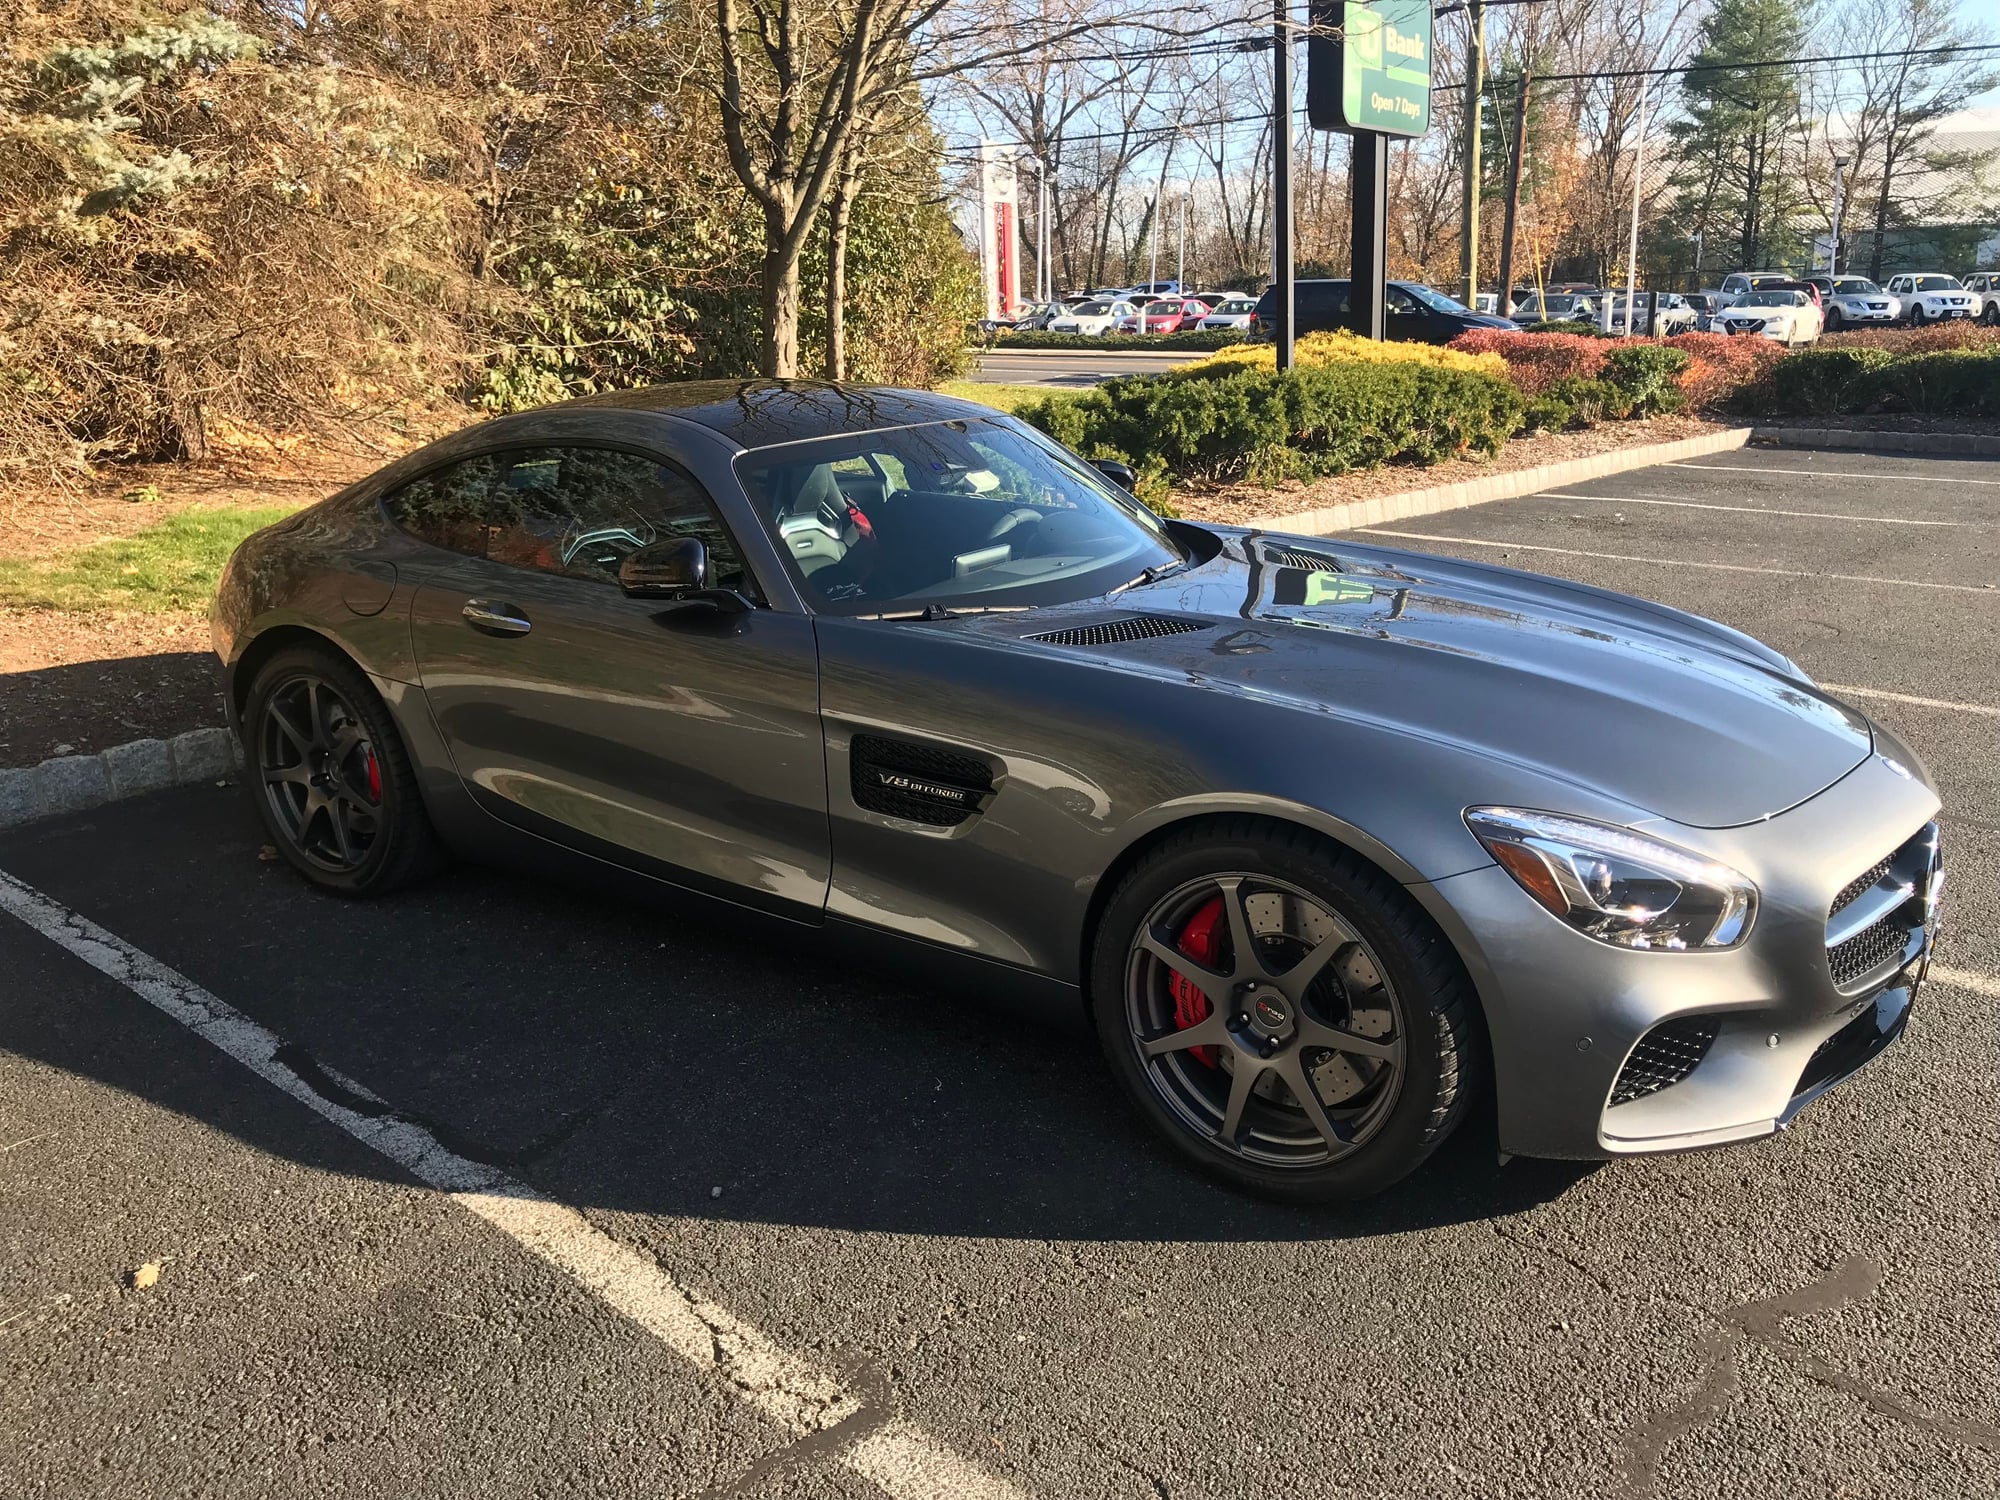 Wheels and Tires/Axles - Winter wheel and tire - AMG GTS - Discounted - TPMS Sensors included - 19 inch - Used - 2016 to 2019 Mercedes-Benz AMG GT S - Harrison ,ny., NY 10580, United States